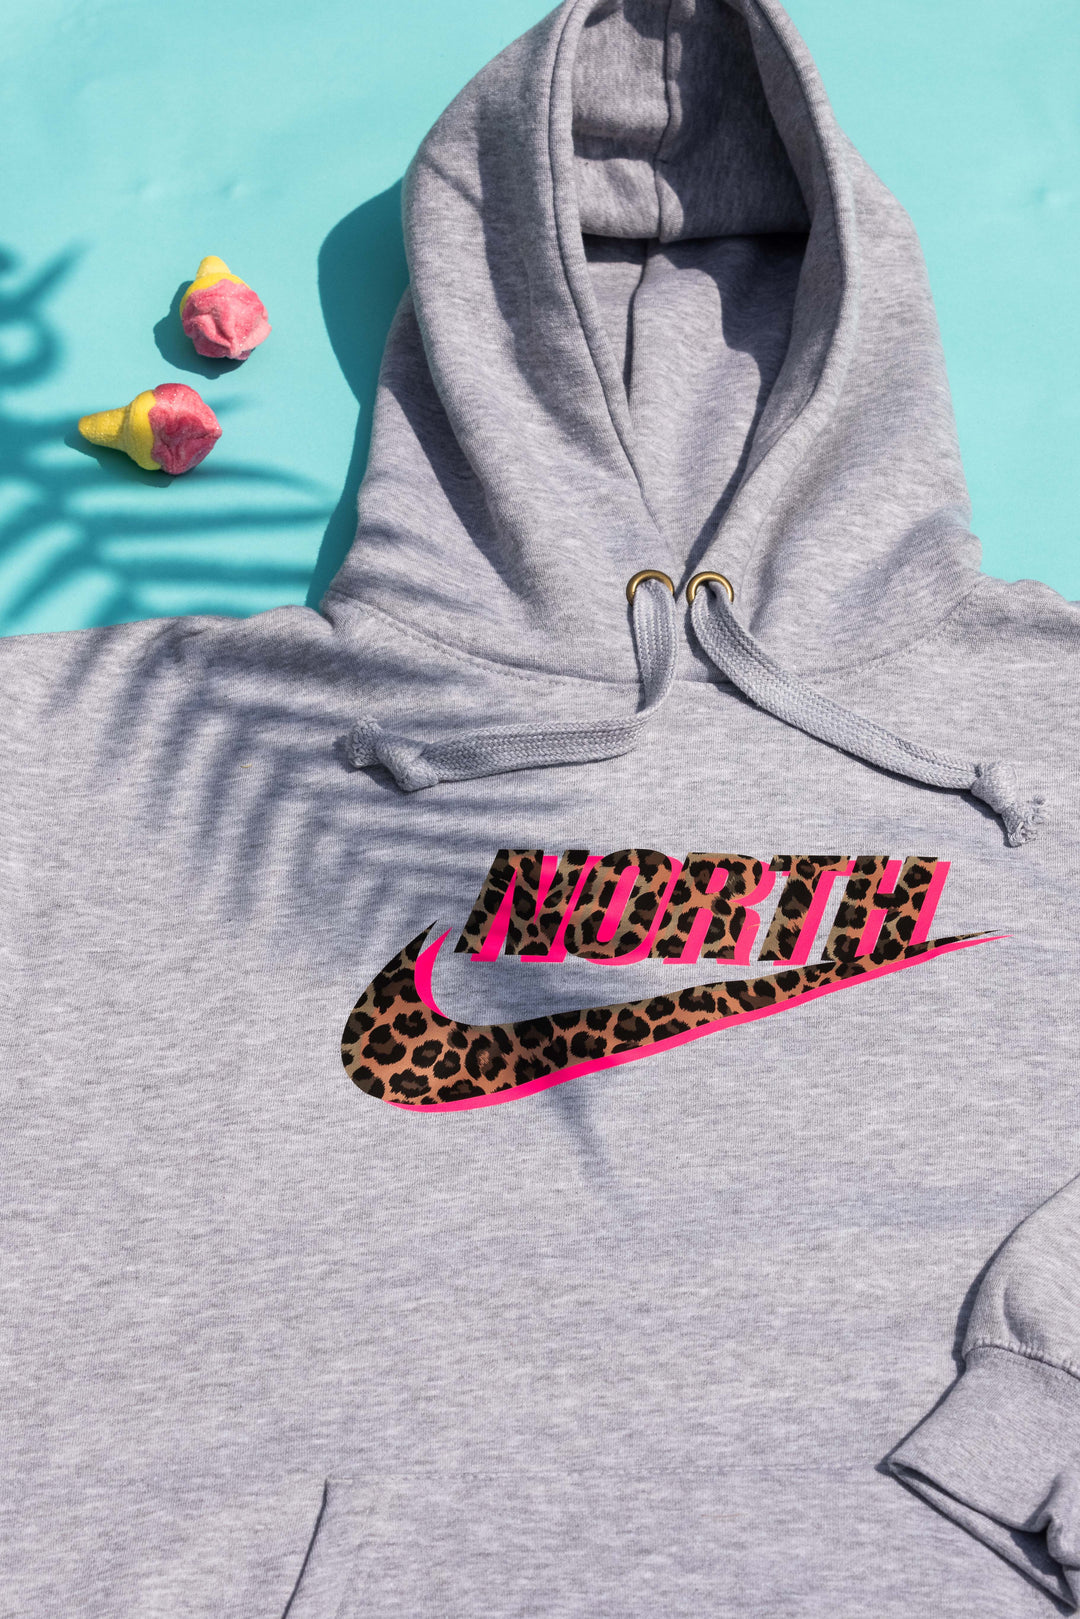 NORTH Grey Hoodie with Leopard Print and Neon Pink